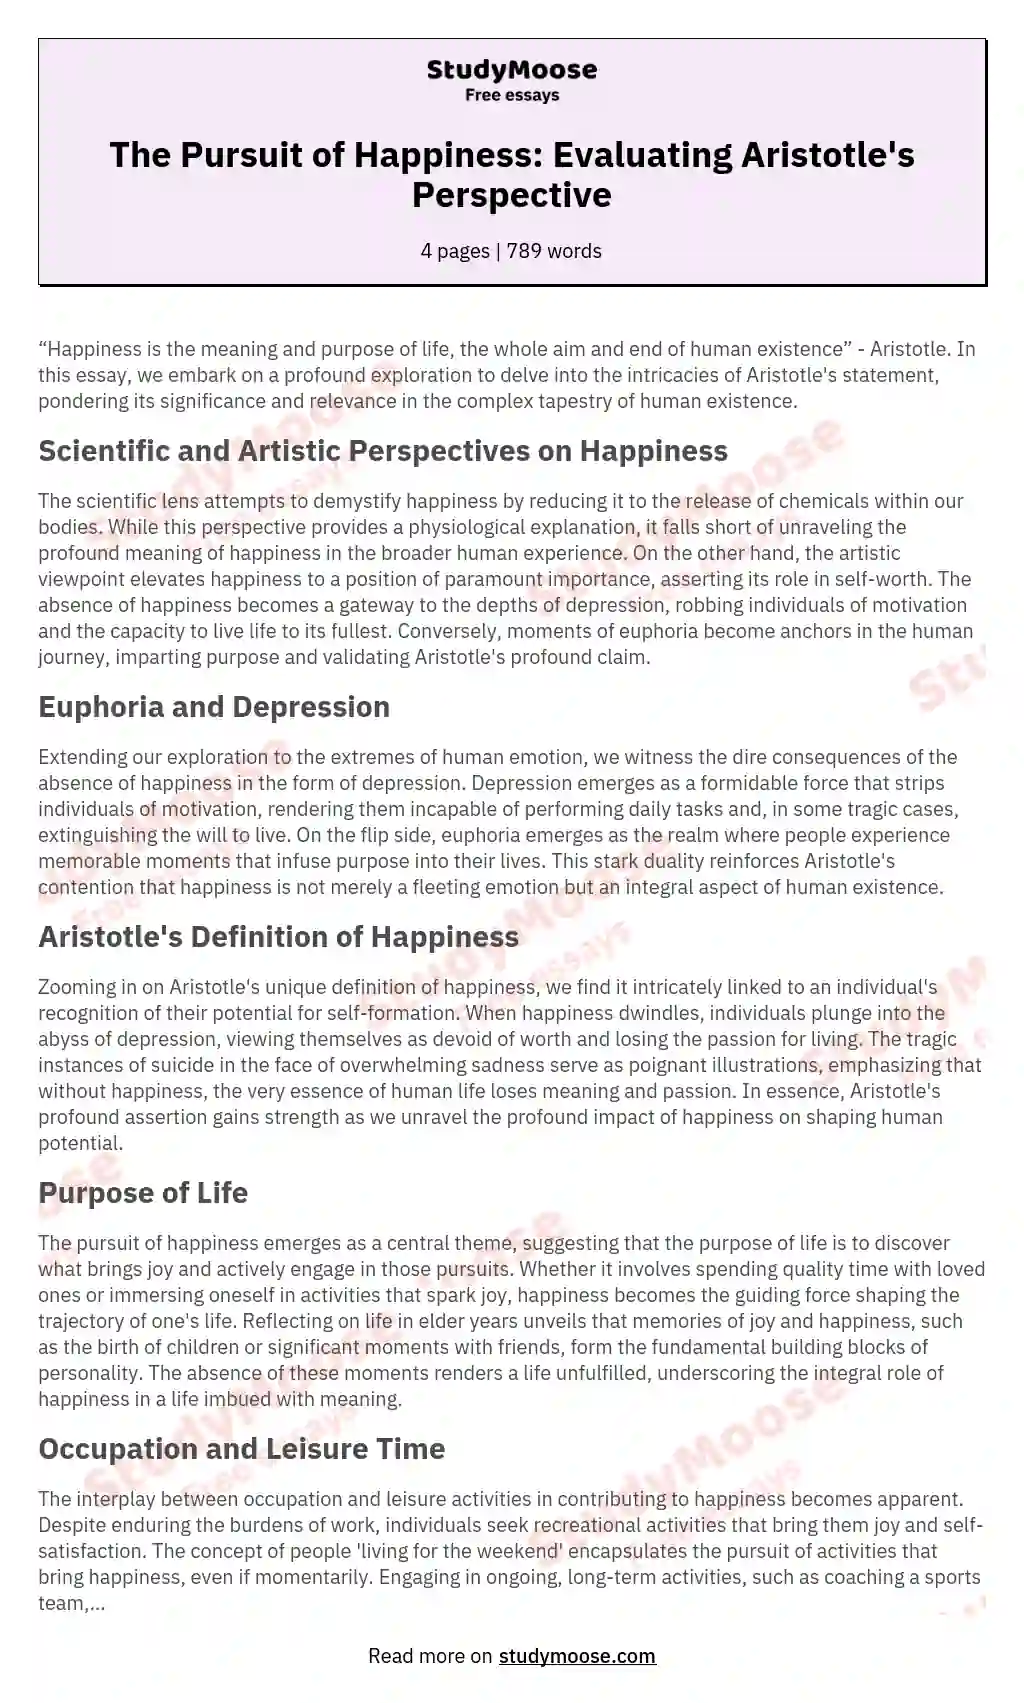 The Pursuit of Happiness: Evaluating Aristotle's Perspective essay